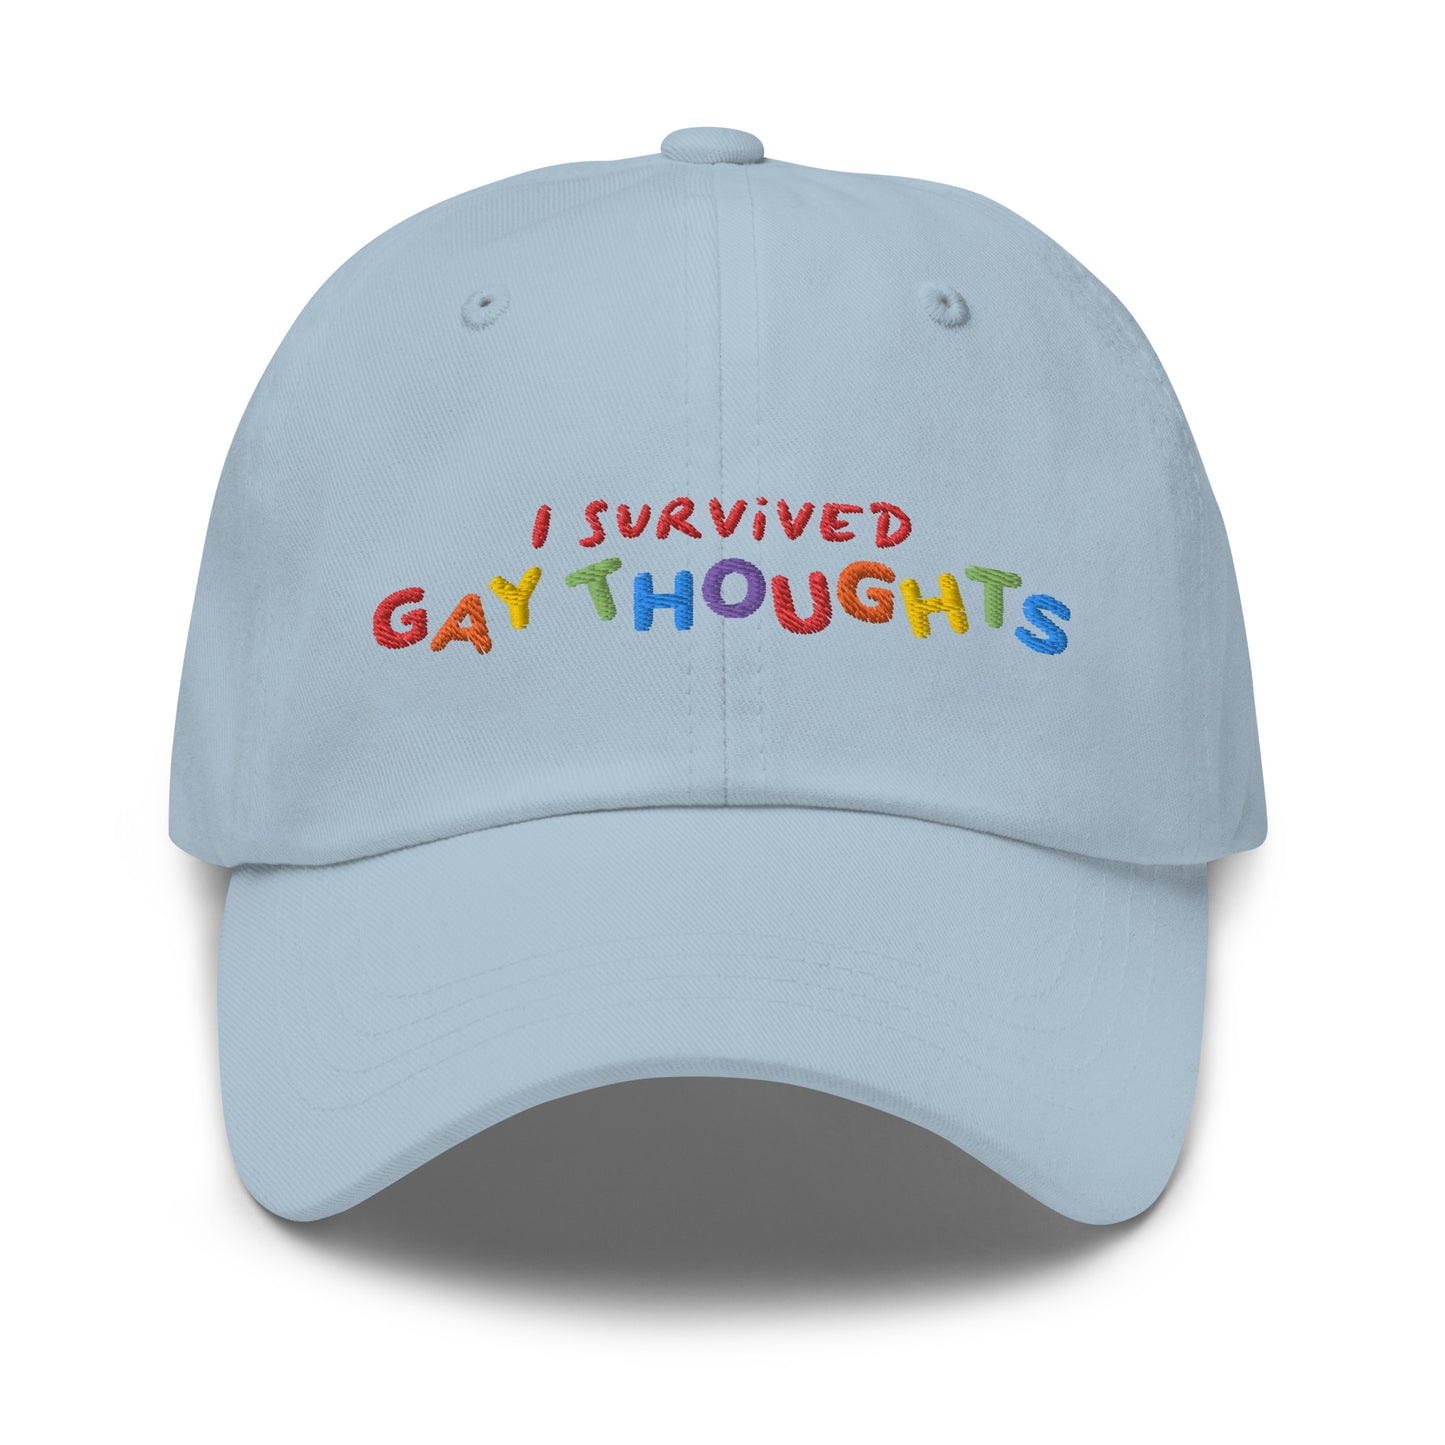 I Survived Gay Thoughts hat